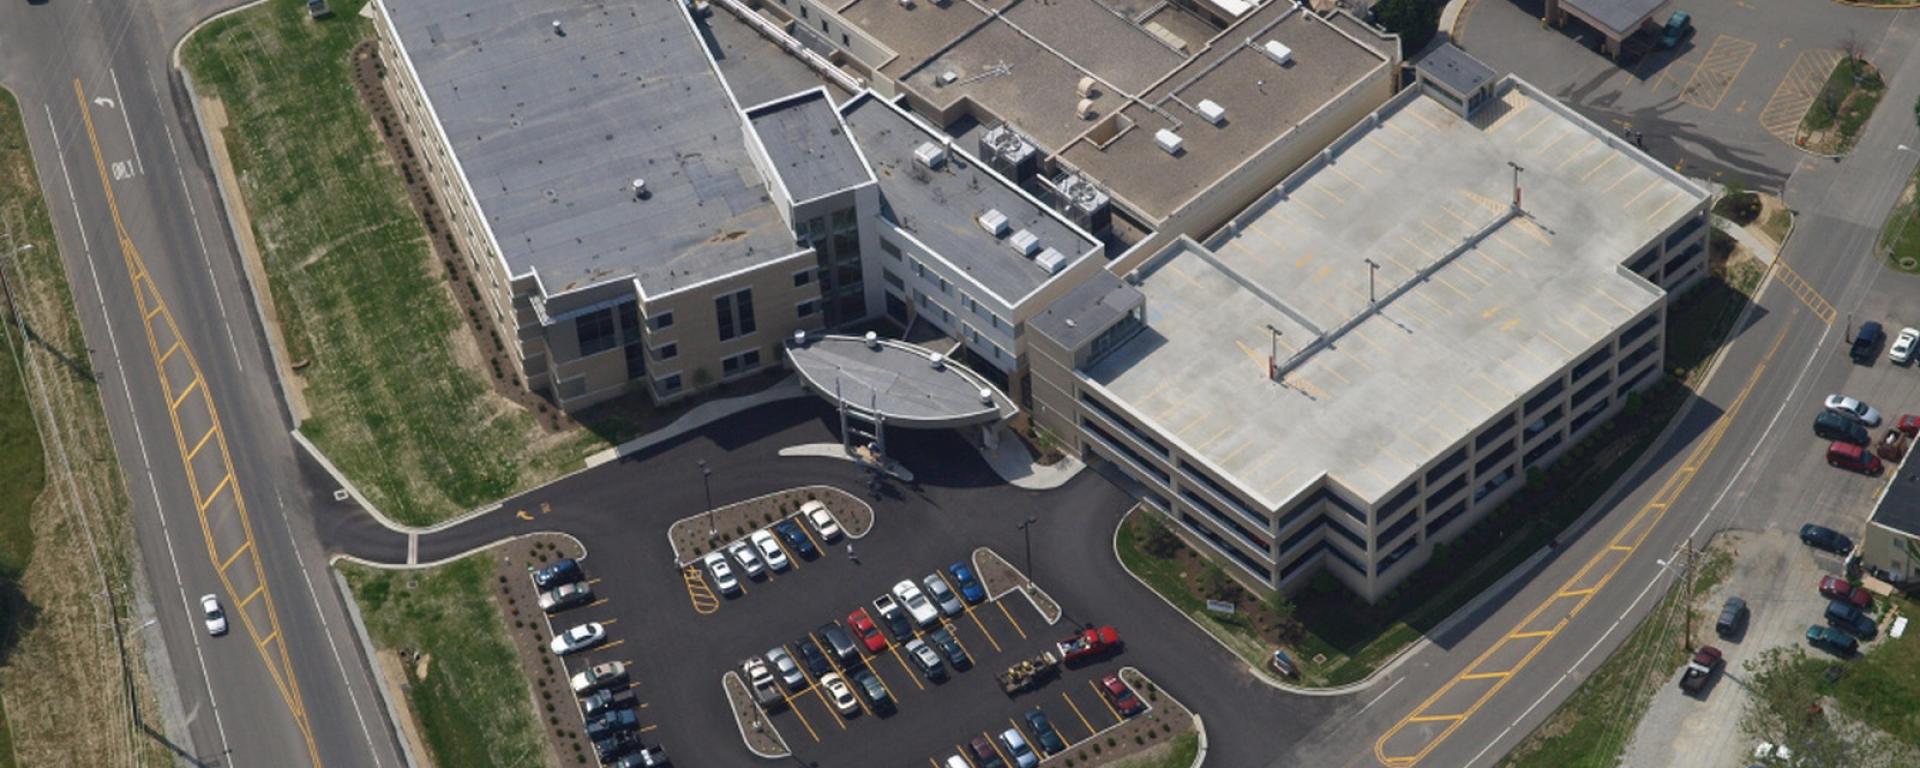 aerial of building and front parking lot